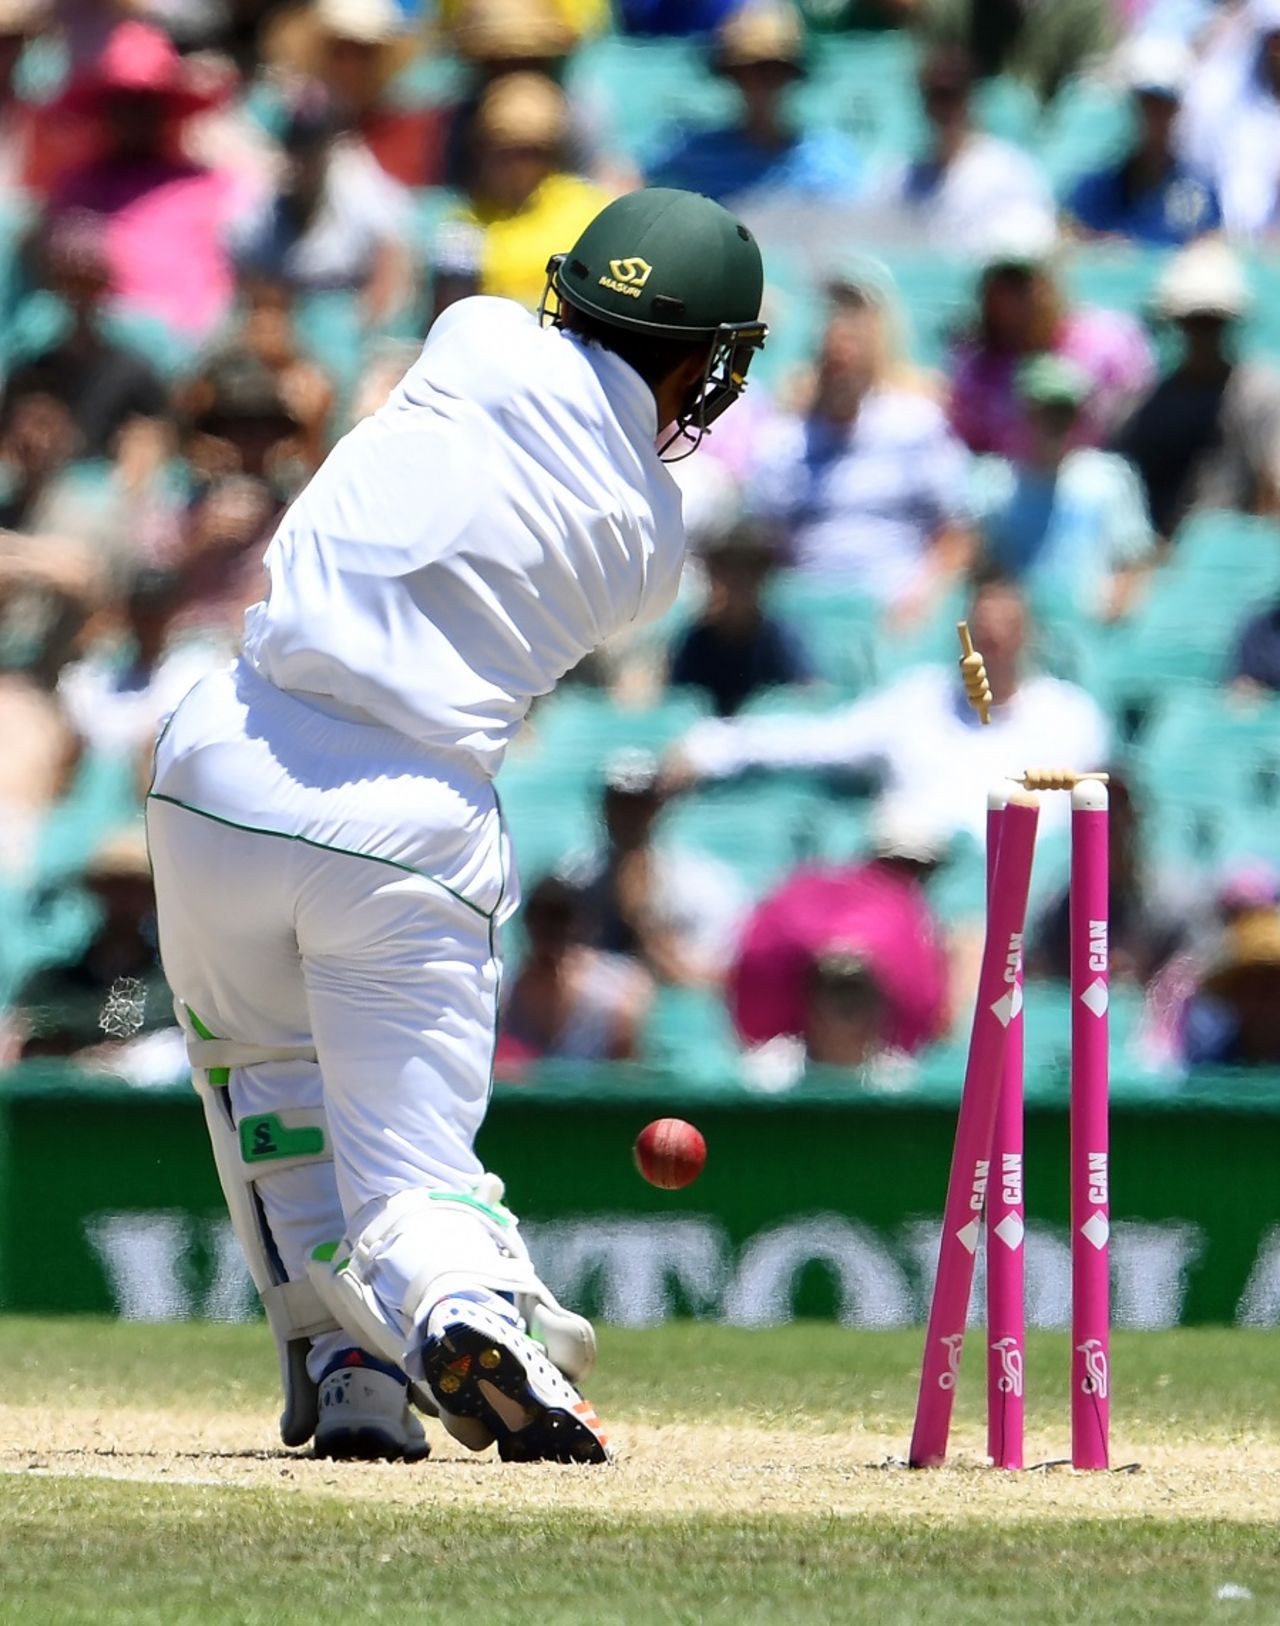 Asad Shafiq was dismissed in the fifth over after lunch, Australia v Pakistan, 3rd Test, Sydney, 5th day, January 7, 2017